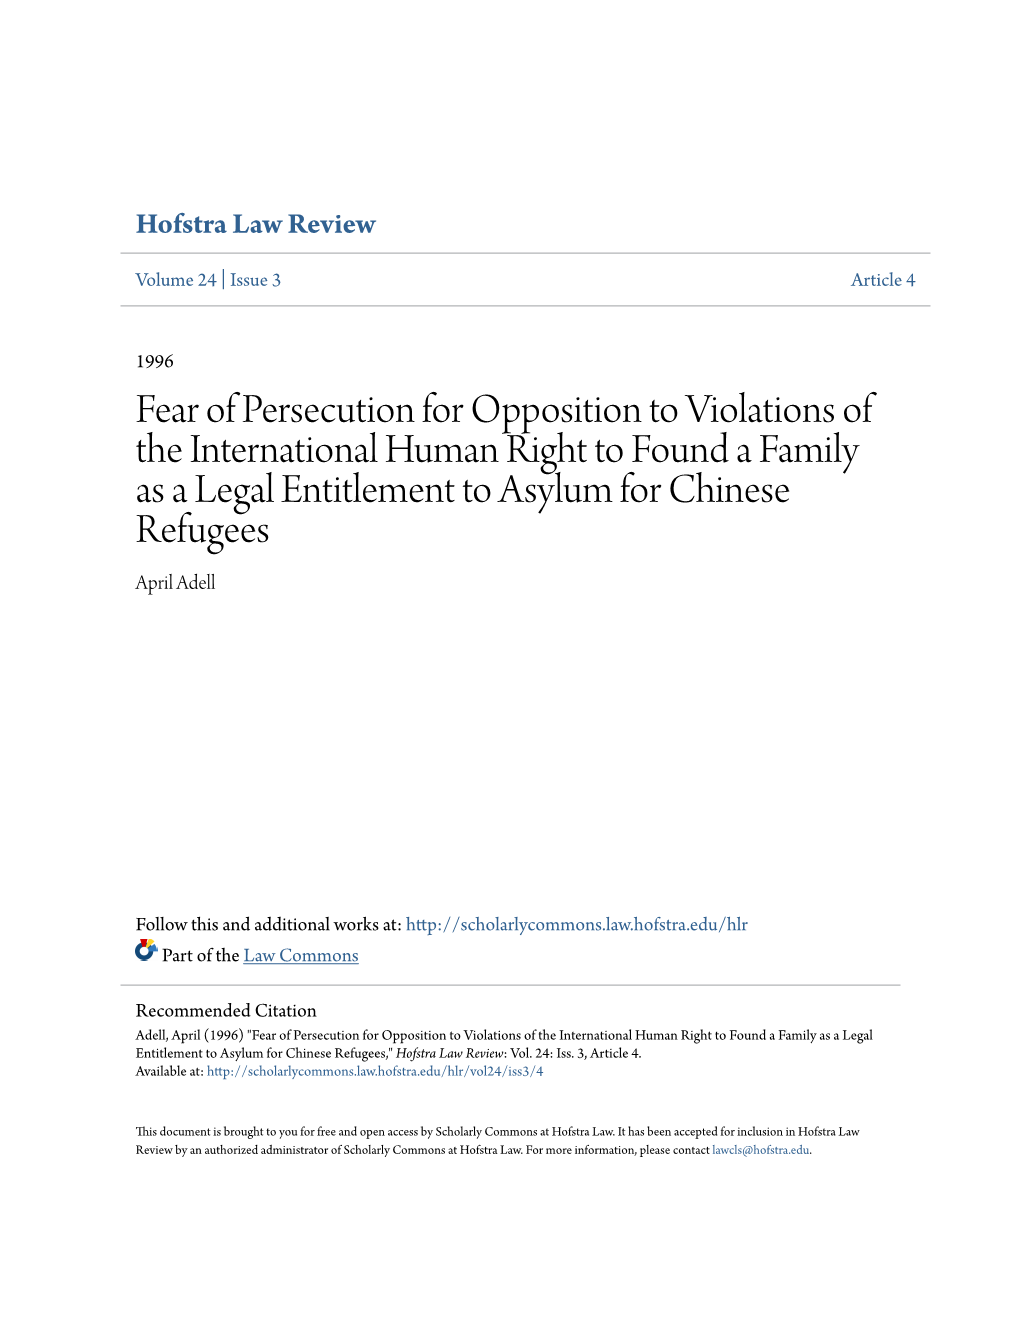 Fear of Persecution for Opposition to Violations of the International Human Right to Found a Family As a Legal Entitlement to Asylum for Chinese Refugees April Adell